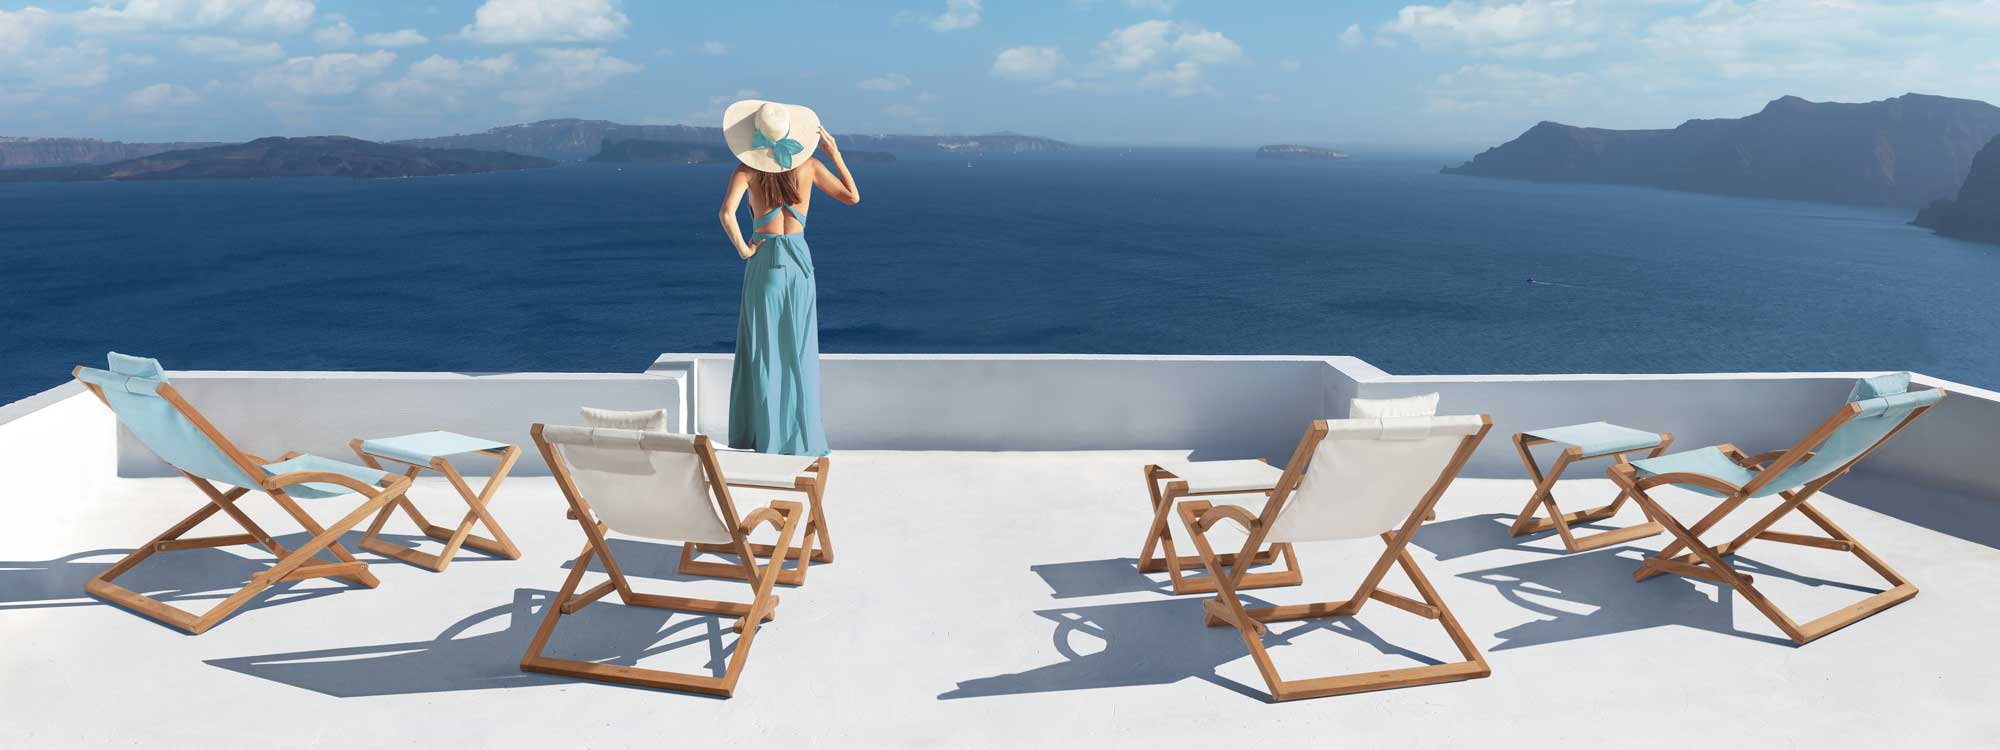 Image of woman looking at Greek islands, surrounded by Beacher deck chairs and foot stools by Royal Botania, with white and blue seat slings.